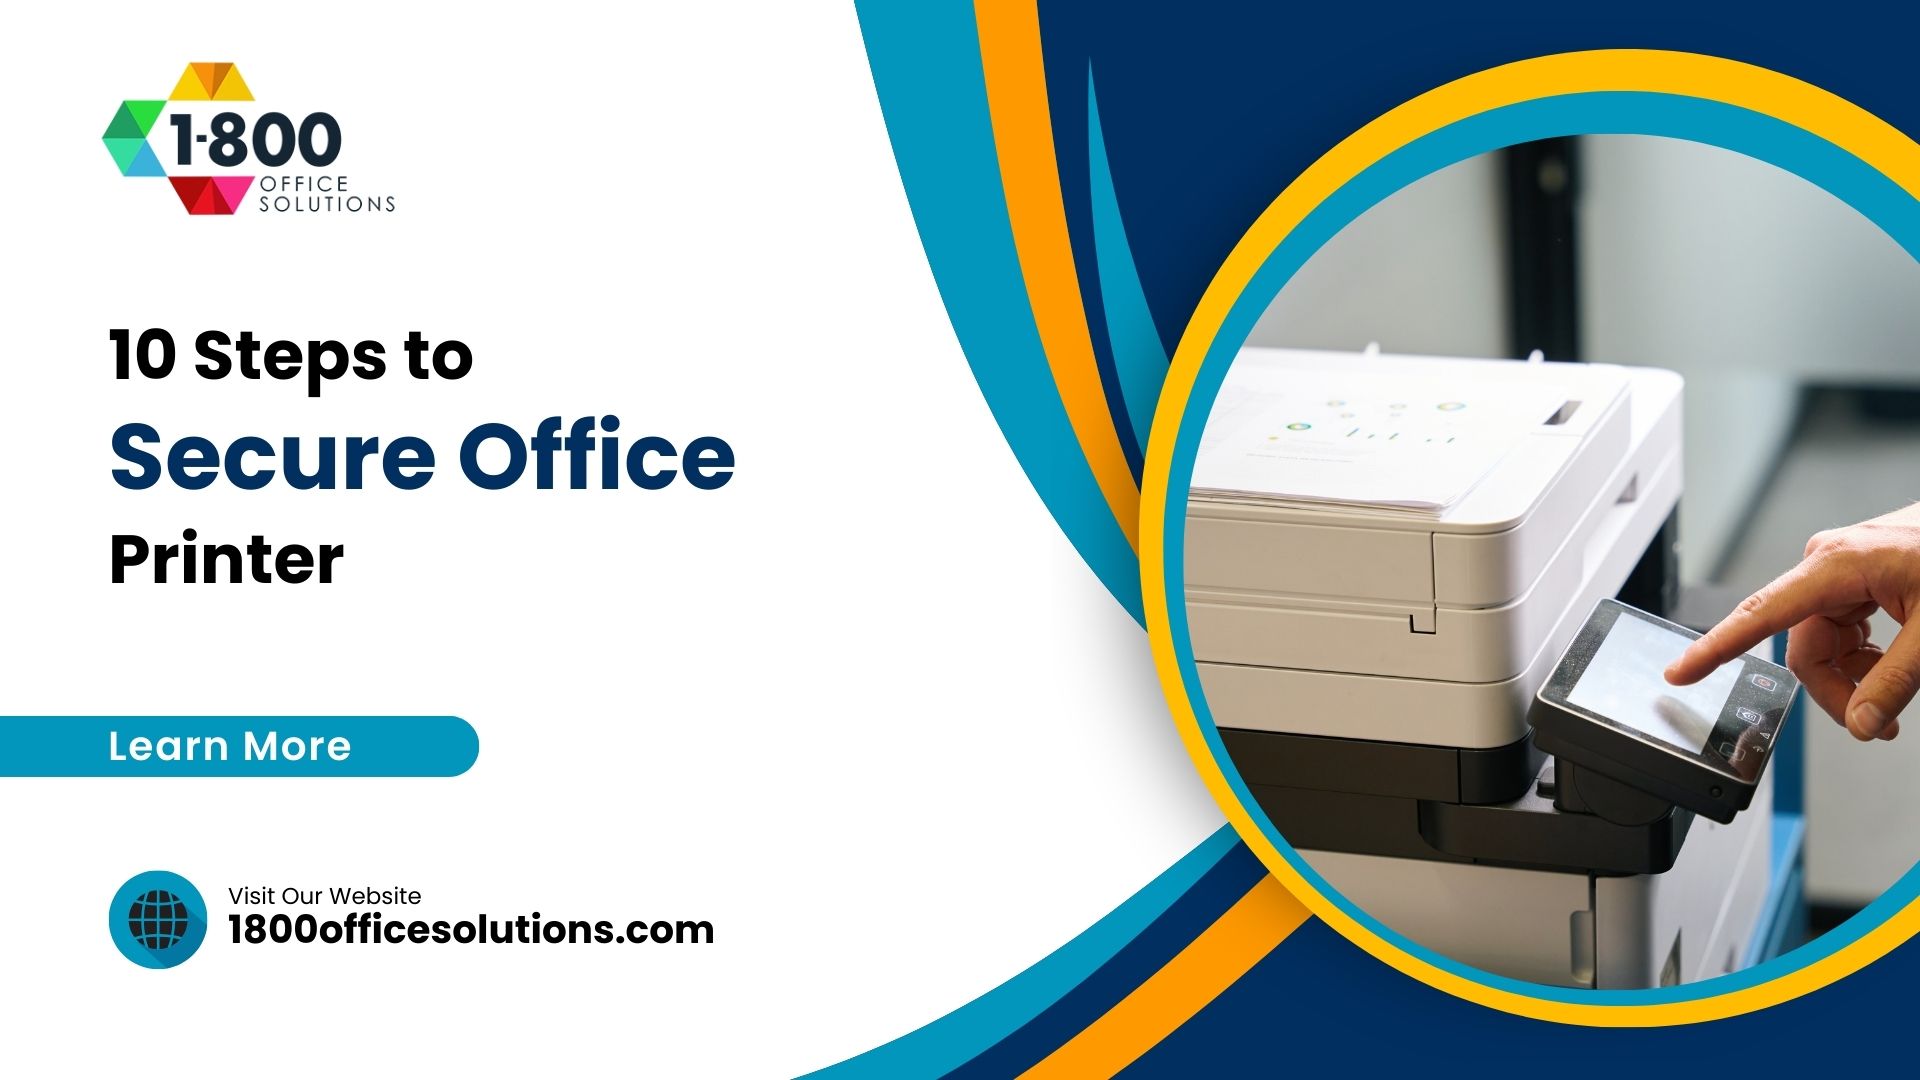 10 Steps to Better Secure Your Office Printer